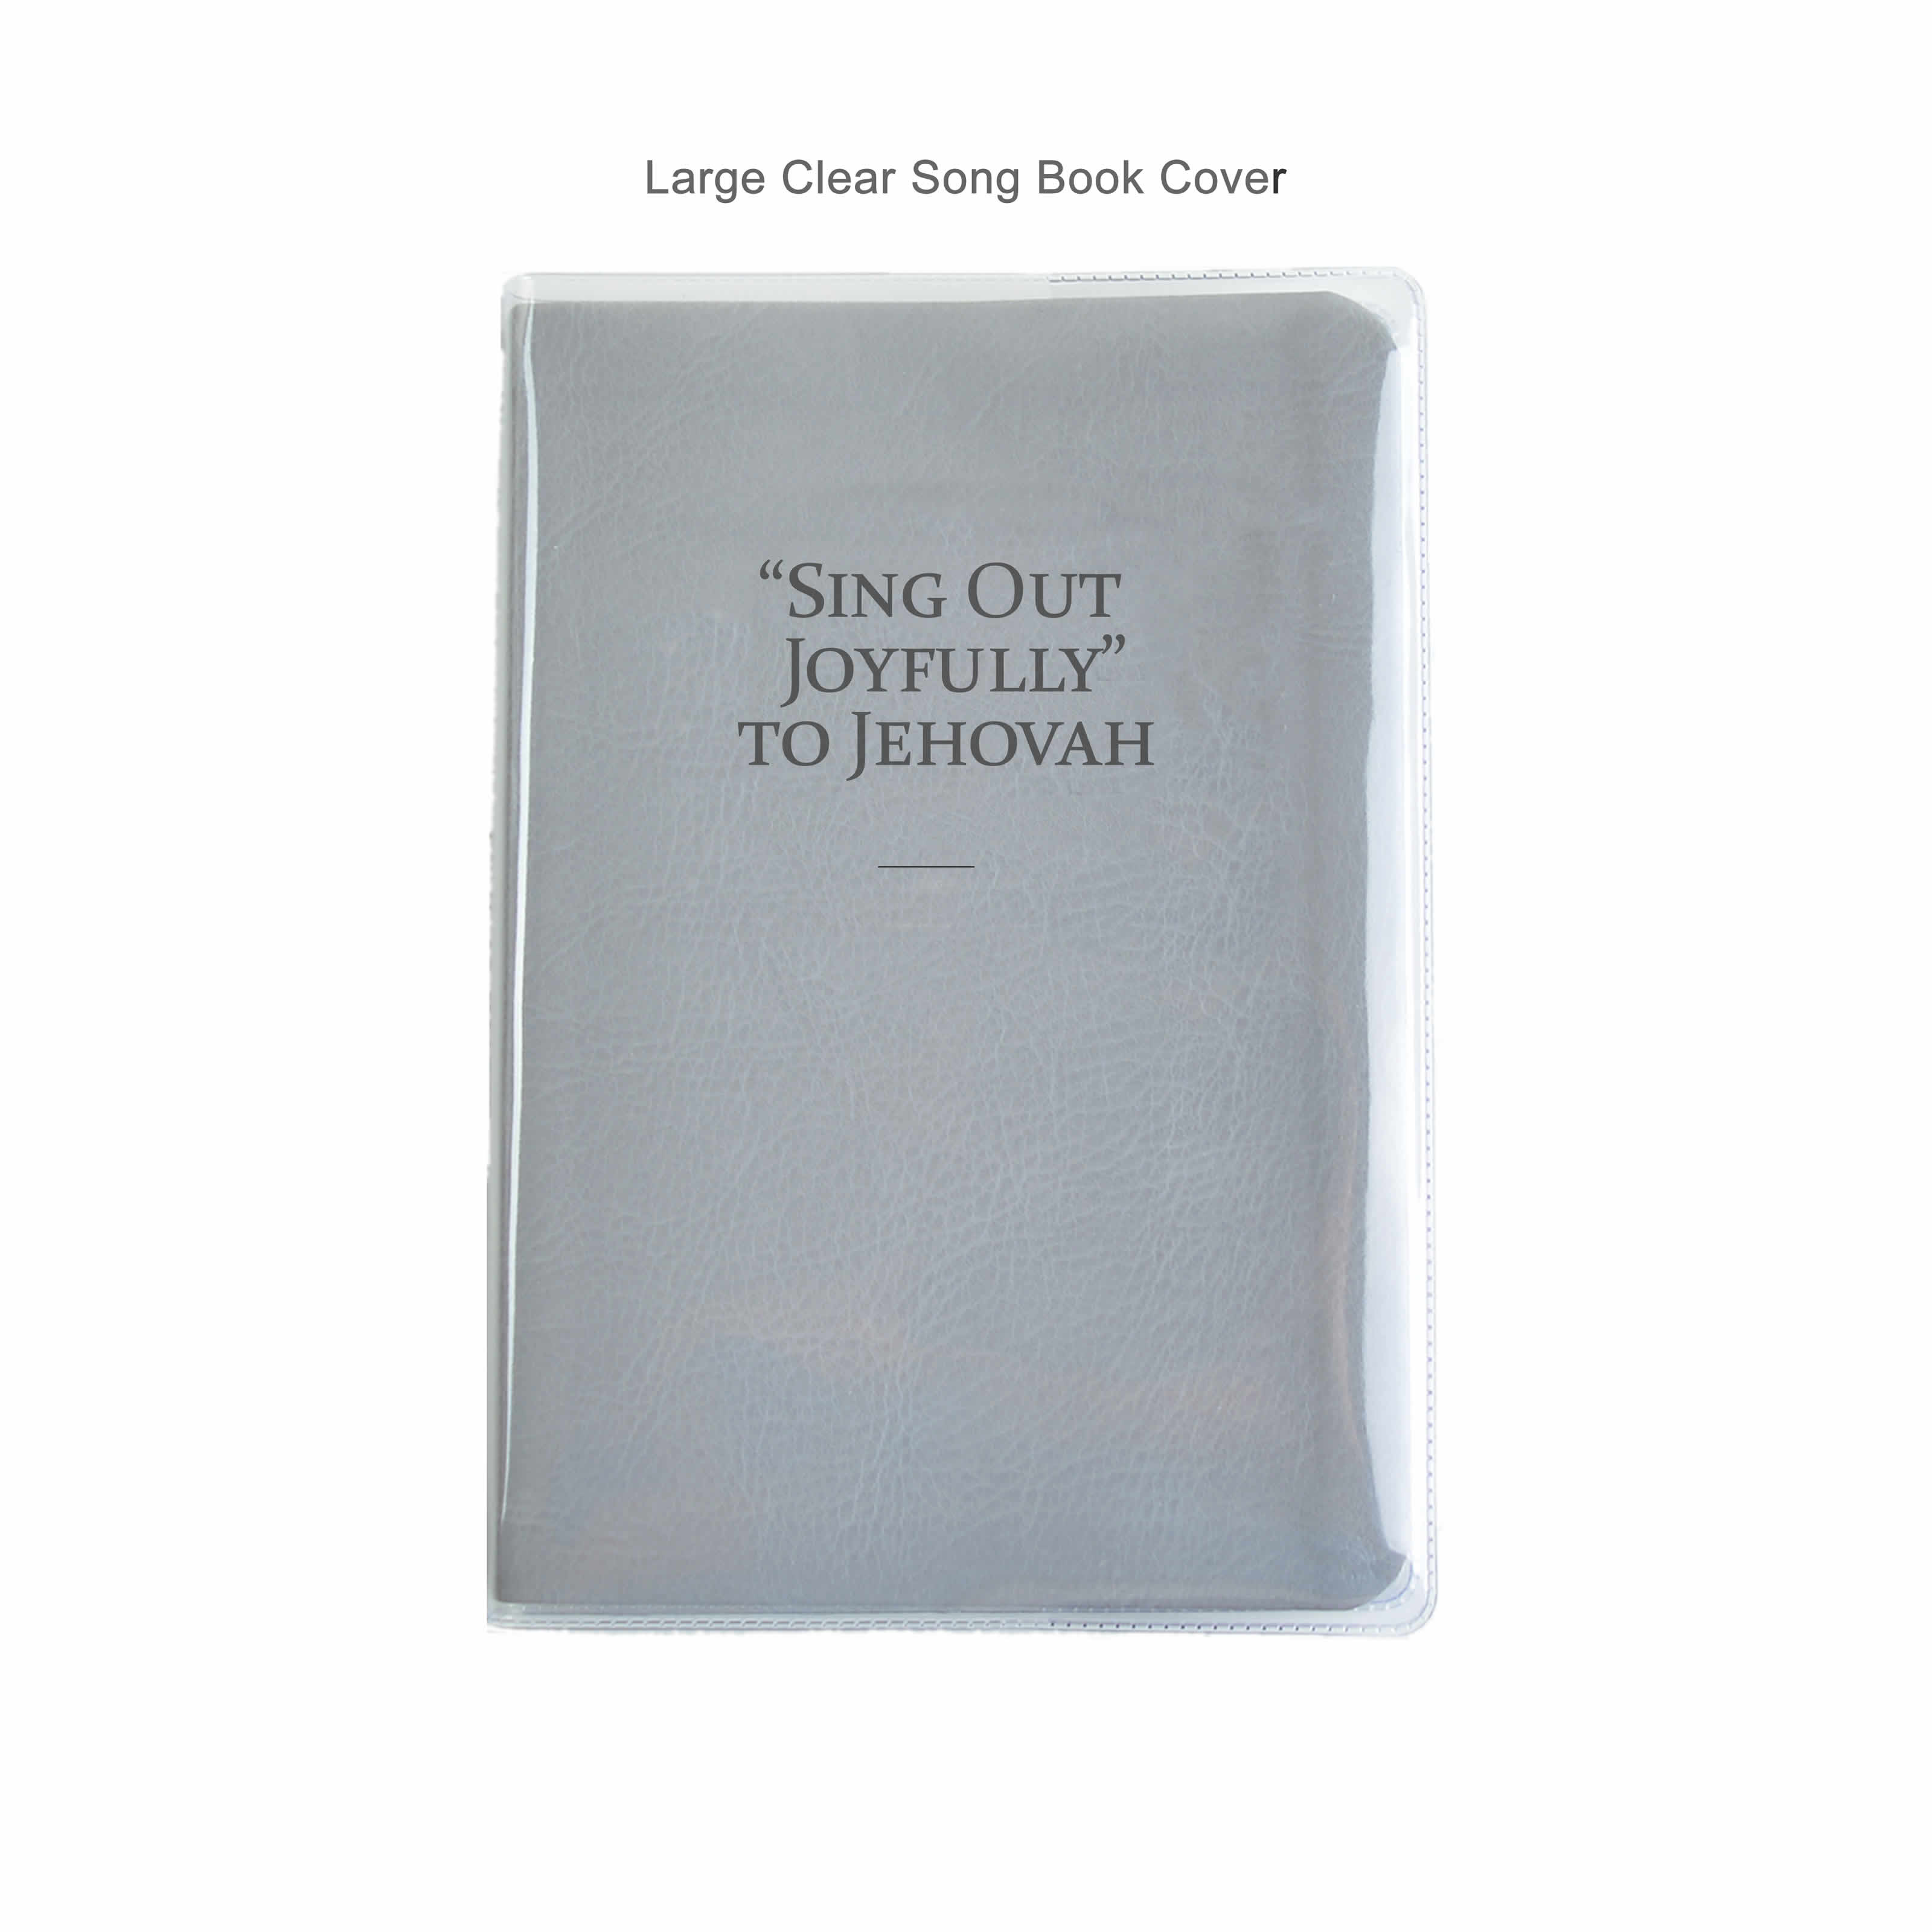 LARGE Song Book Cover - Clear - Sing Out Joyfully to Jehovah 